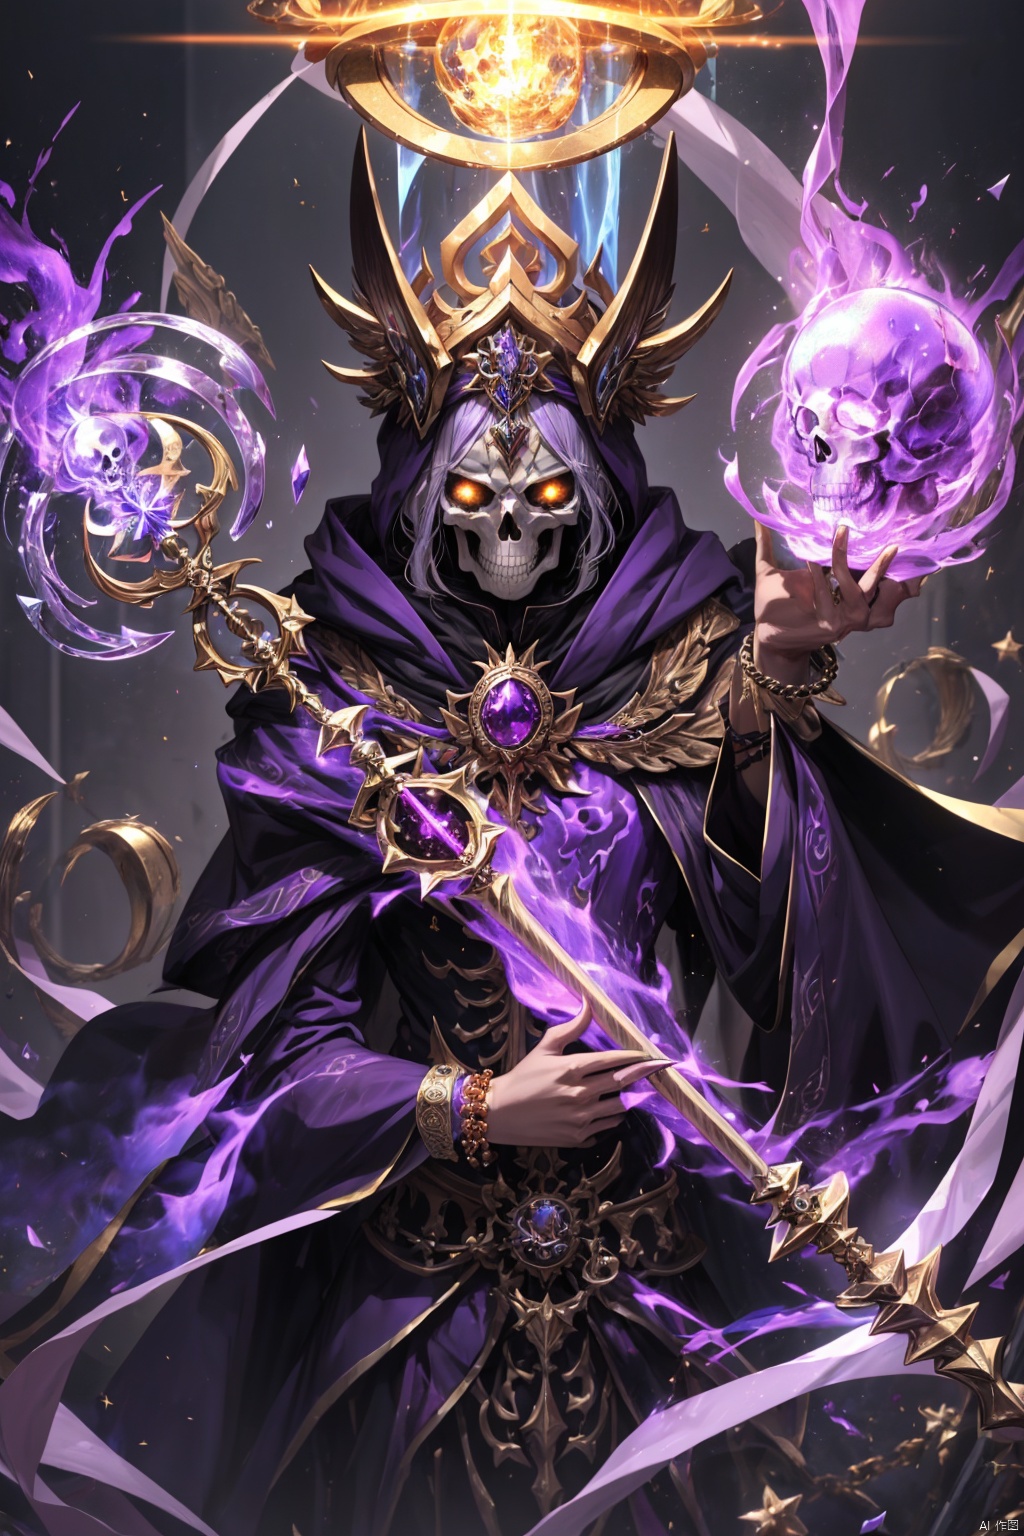  Masterpiece, high detail, 8K, high-definition, Skeleton mage, with a rugged skull outline, a towering forehead, a high nose bridge, and purple magic sparkling pupils. Two purple flames hover behind him, a black robe covered in golden purple magic runes, a magic wand inlaid with purple gemstones, adorned with metal decorations such as bracelets and pendants, cinematic lighting effects, depth of field, and blue purple tones

